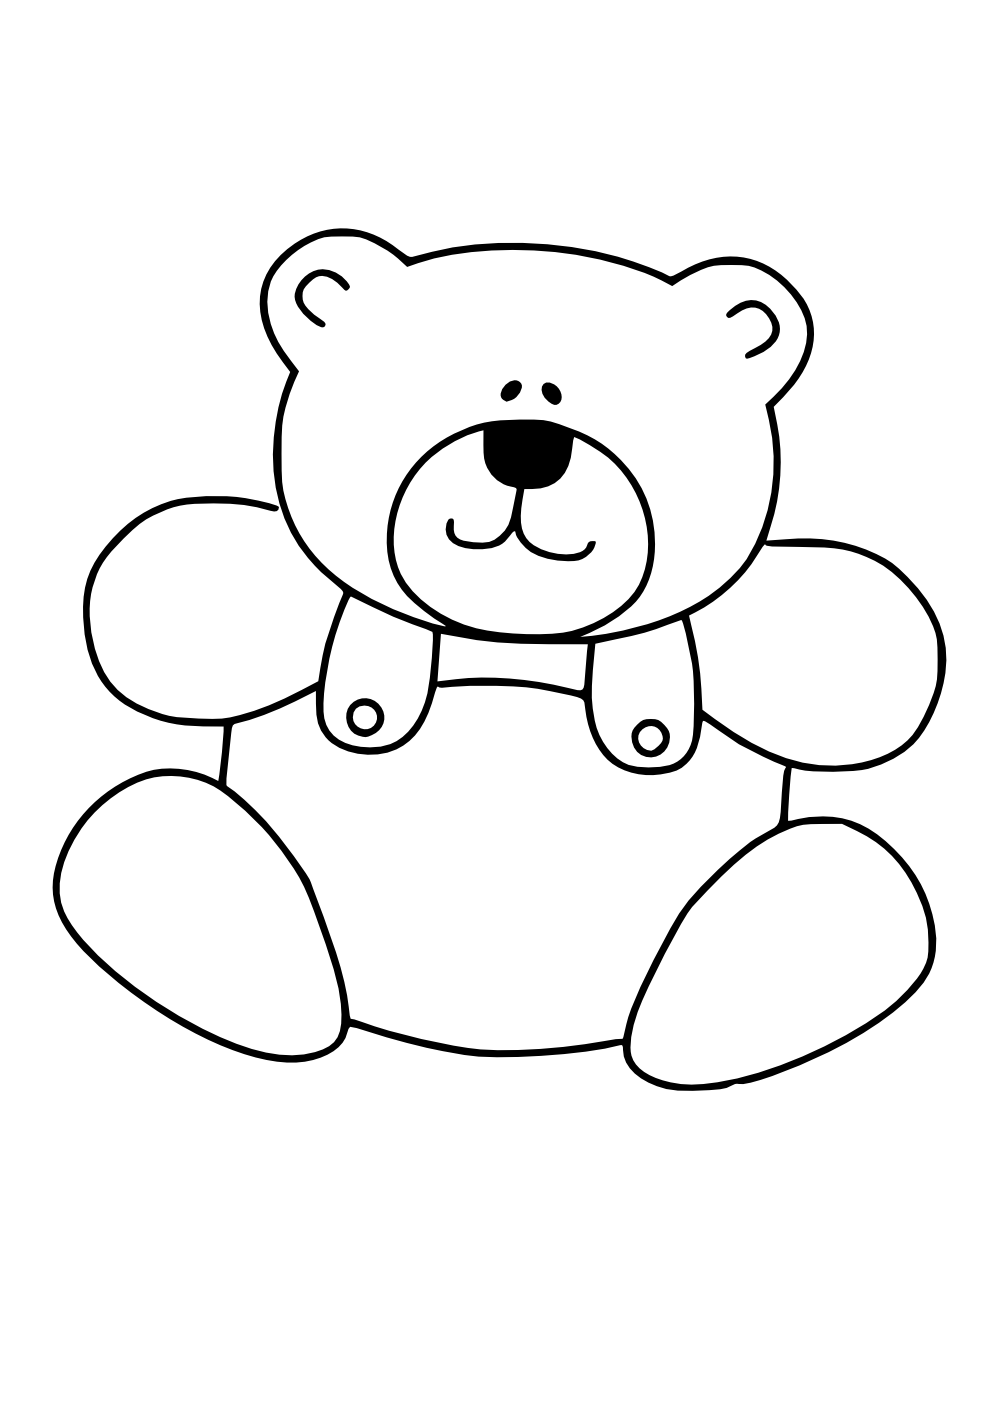 Clipart Teddy Bear Black And White Images  Pictures - Becuo